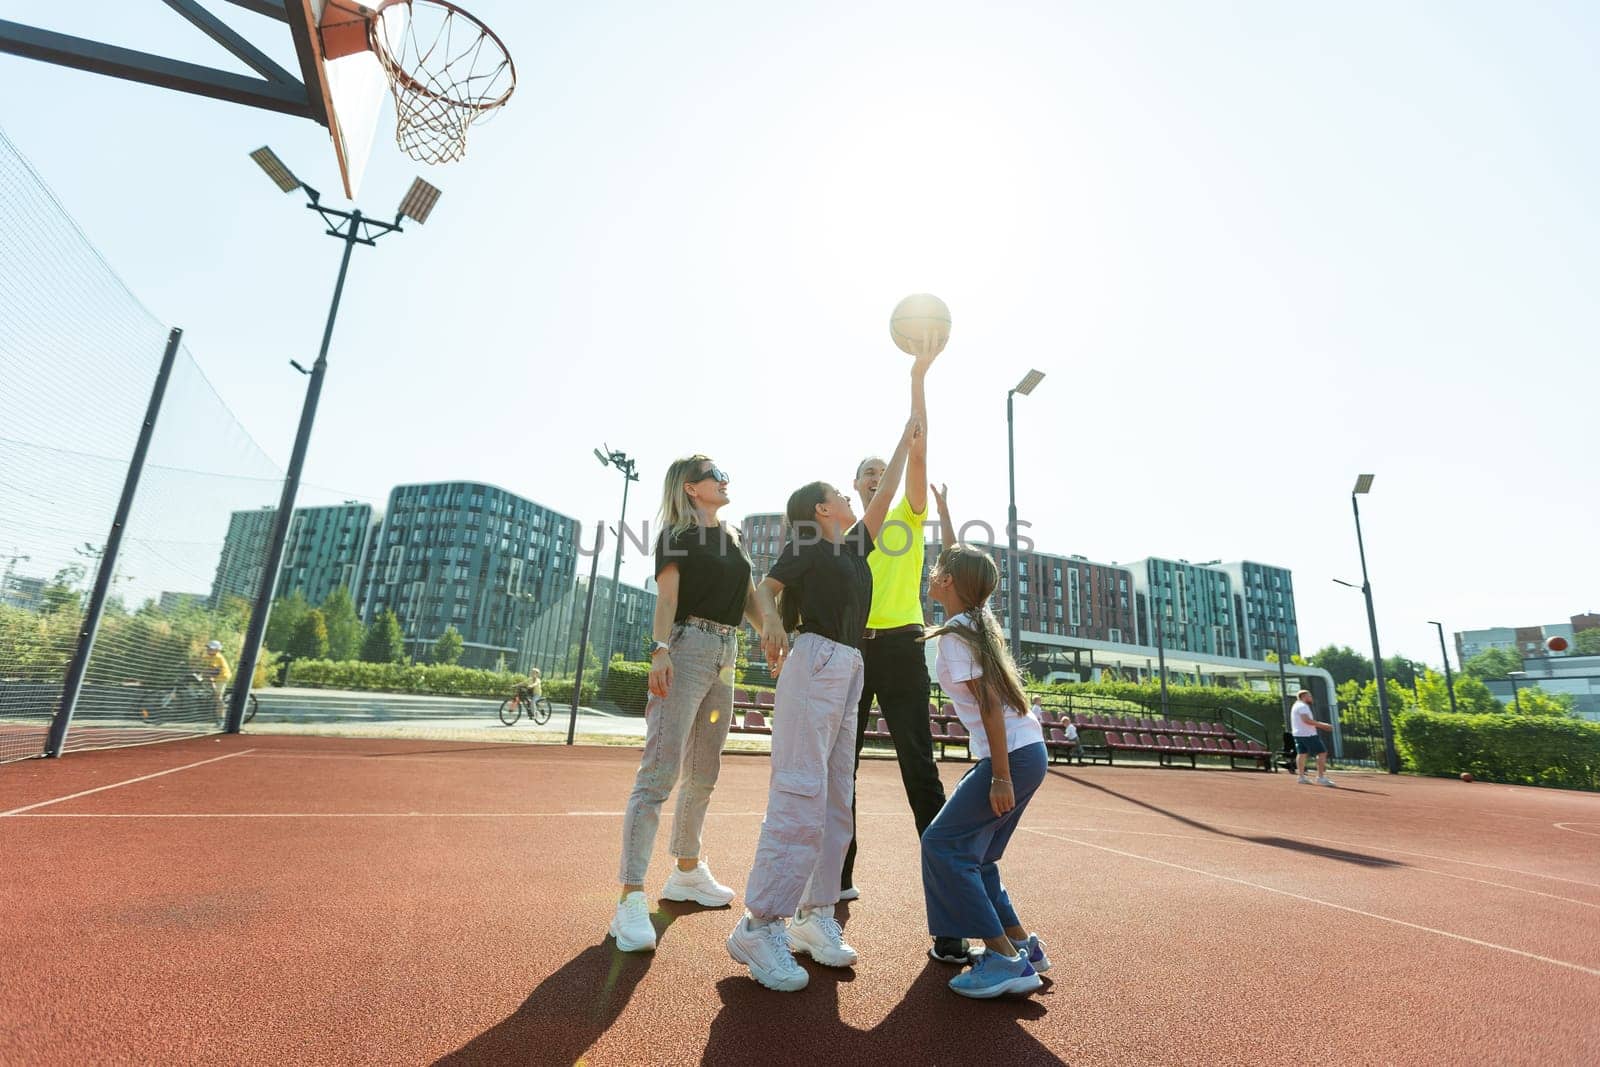 Basketball with family make me happy. High quality photo